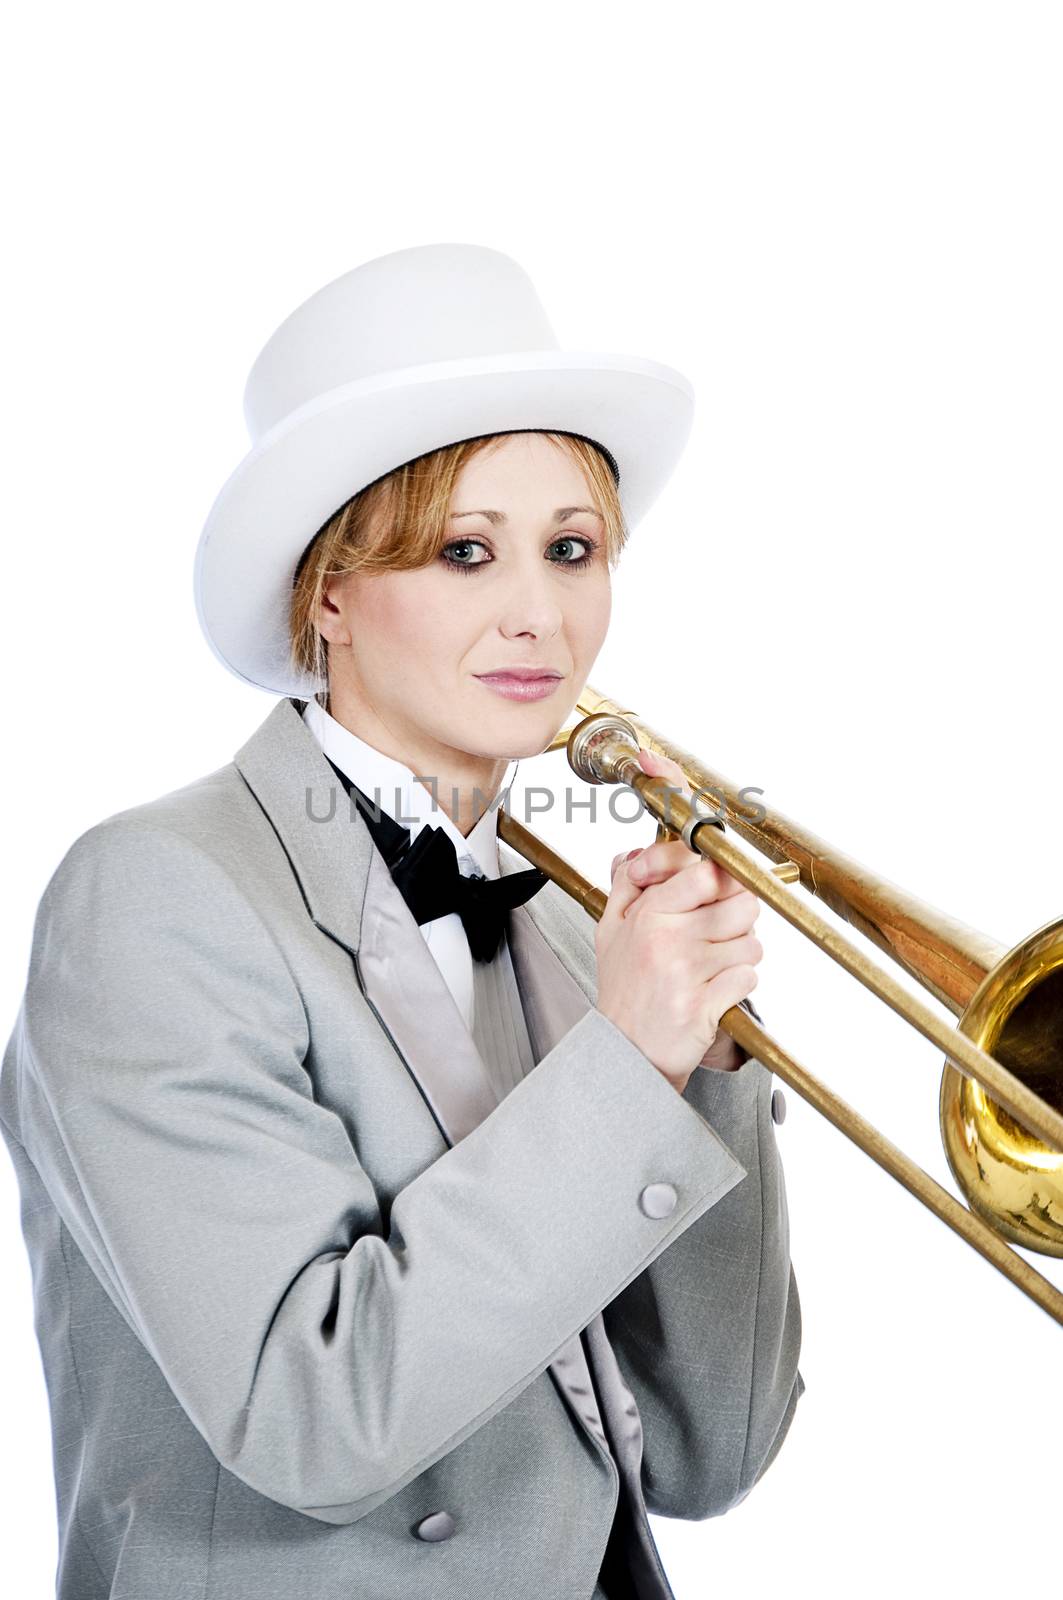 Pretty Young Woman Trombone Player In A Tuxedo by rcarner